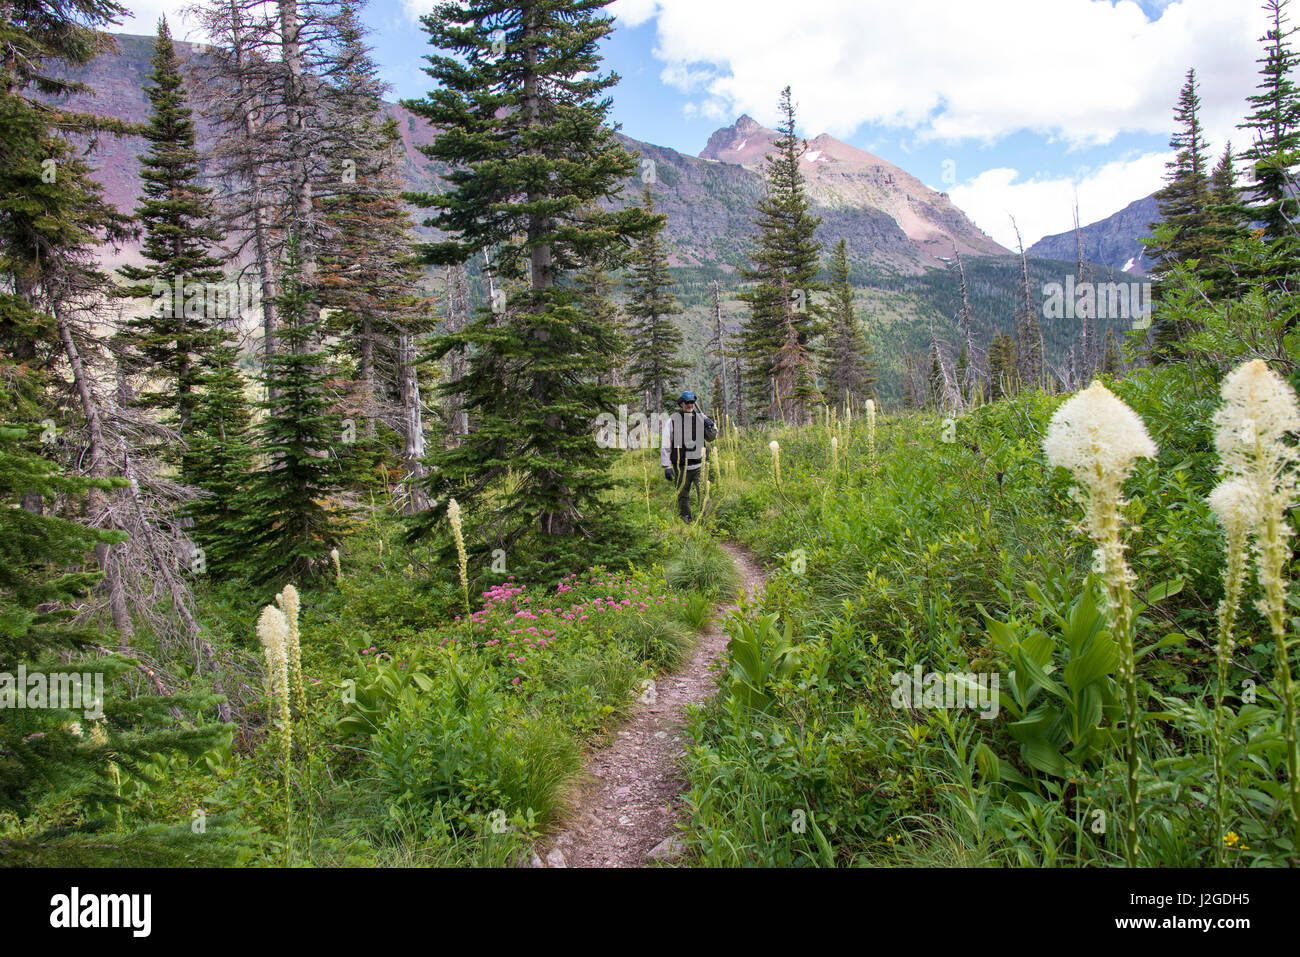 US, MT, Glacier National Park. Hiker in Two Medicine area. bear grass lined trail to Cobalt Lake. (MR) Stock Photo